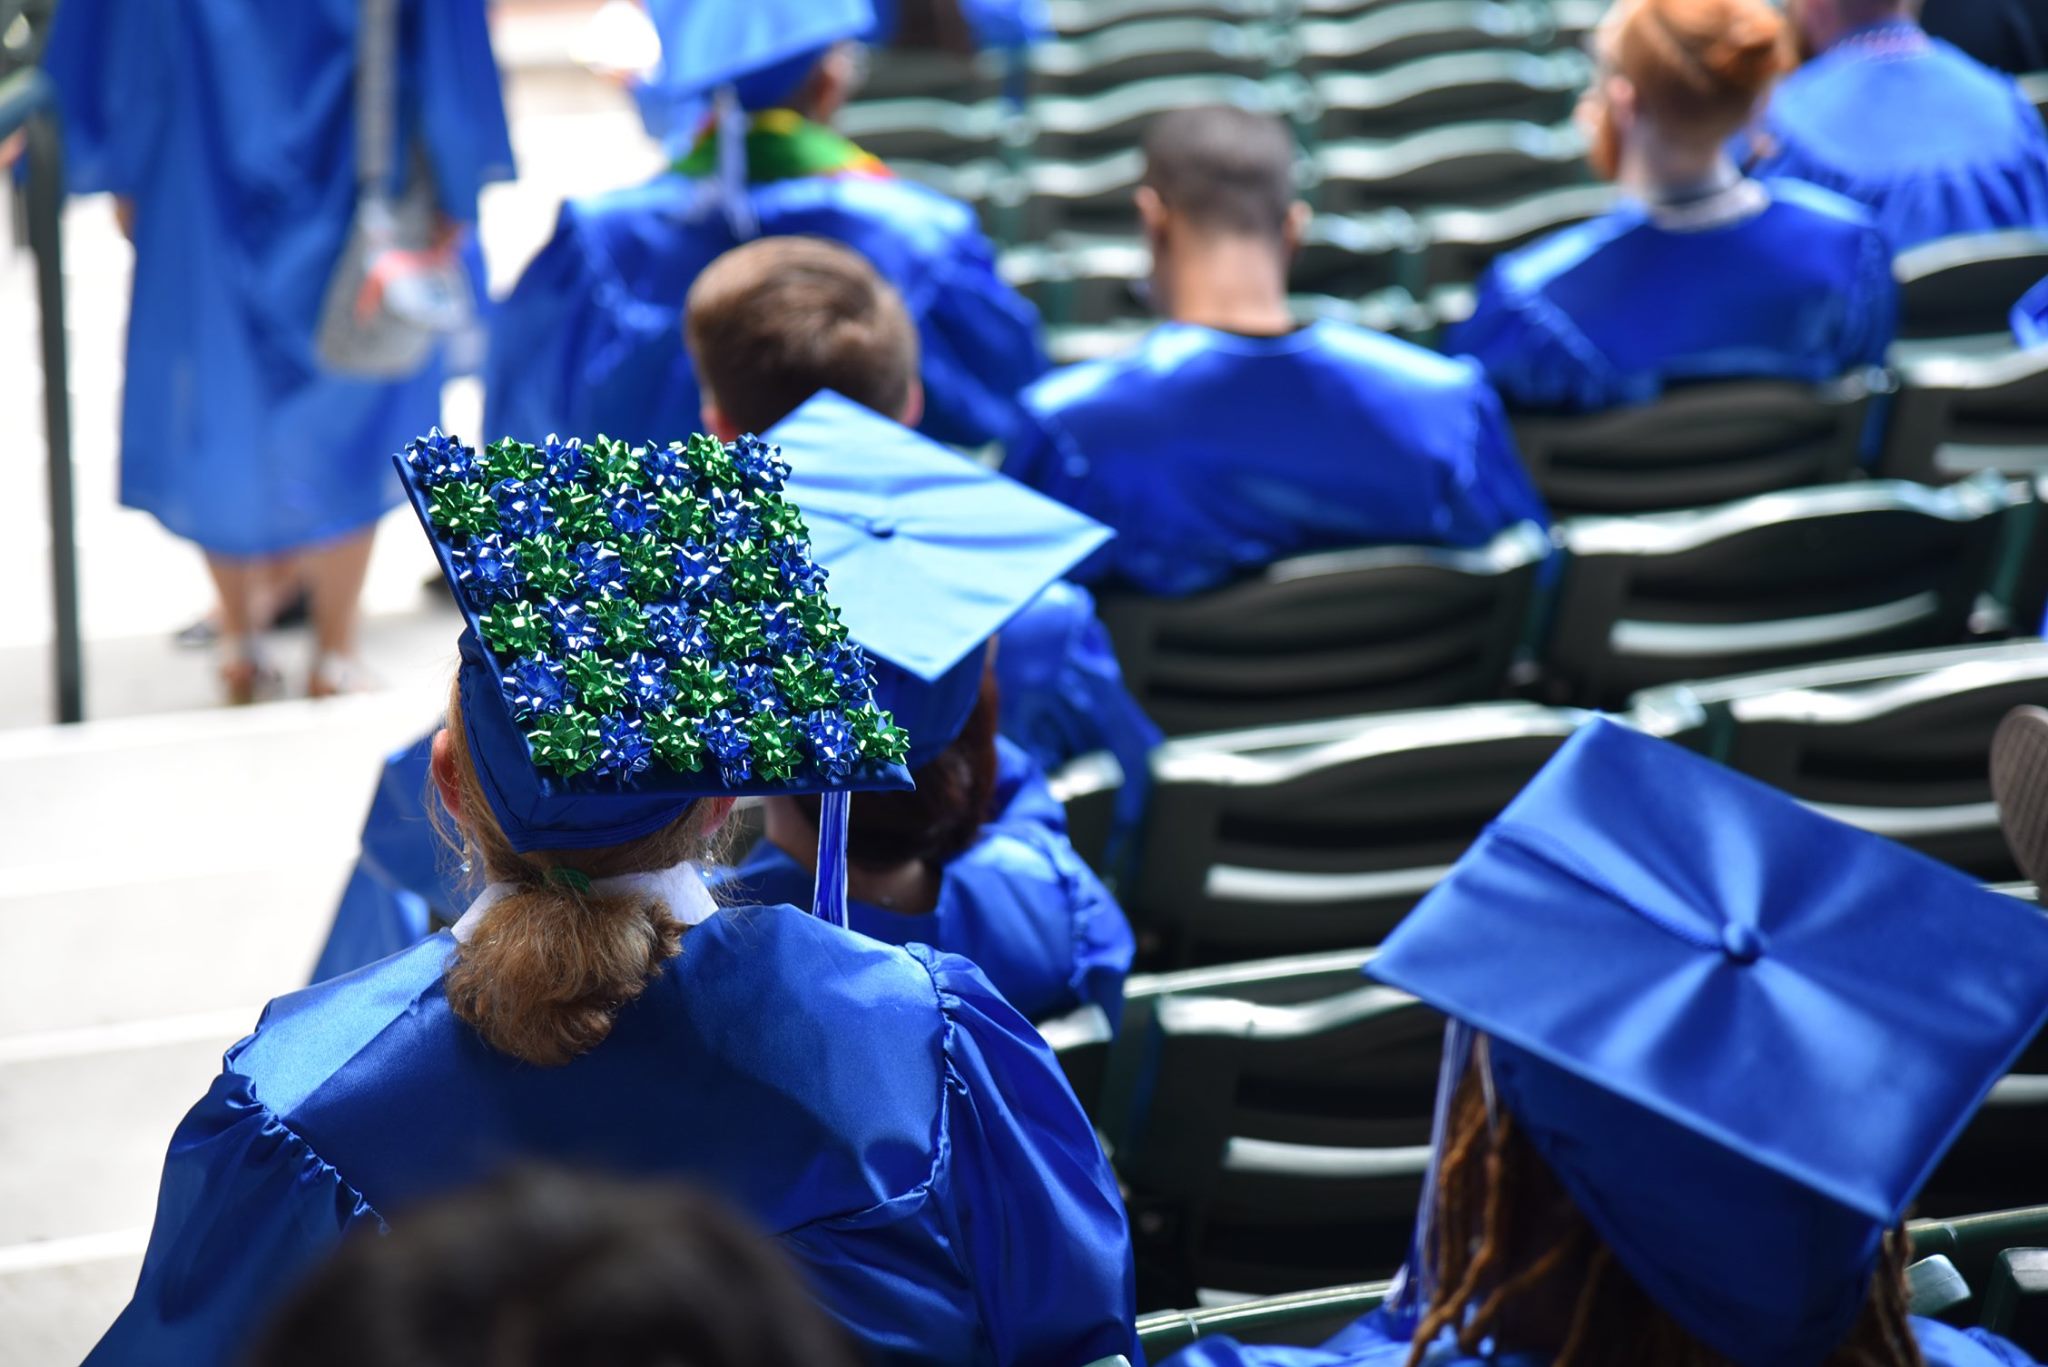 two students wait for the commencement ceremony in the stands of the ball field